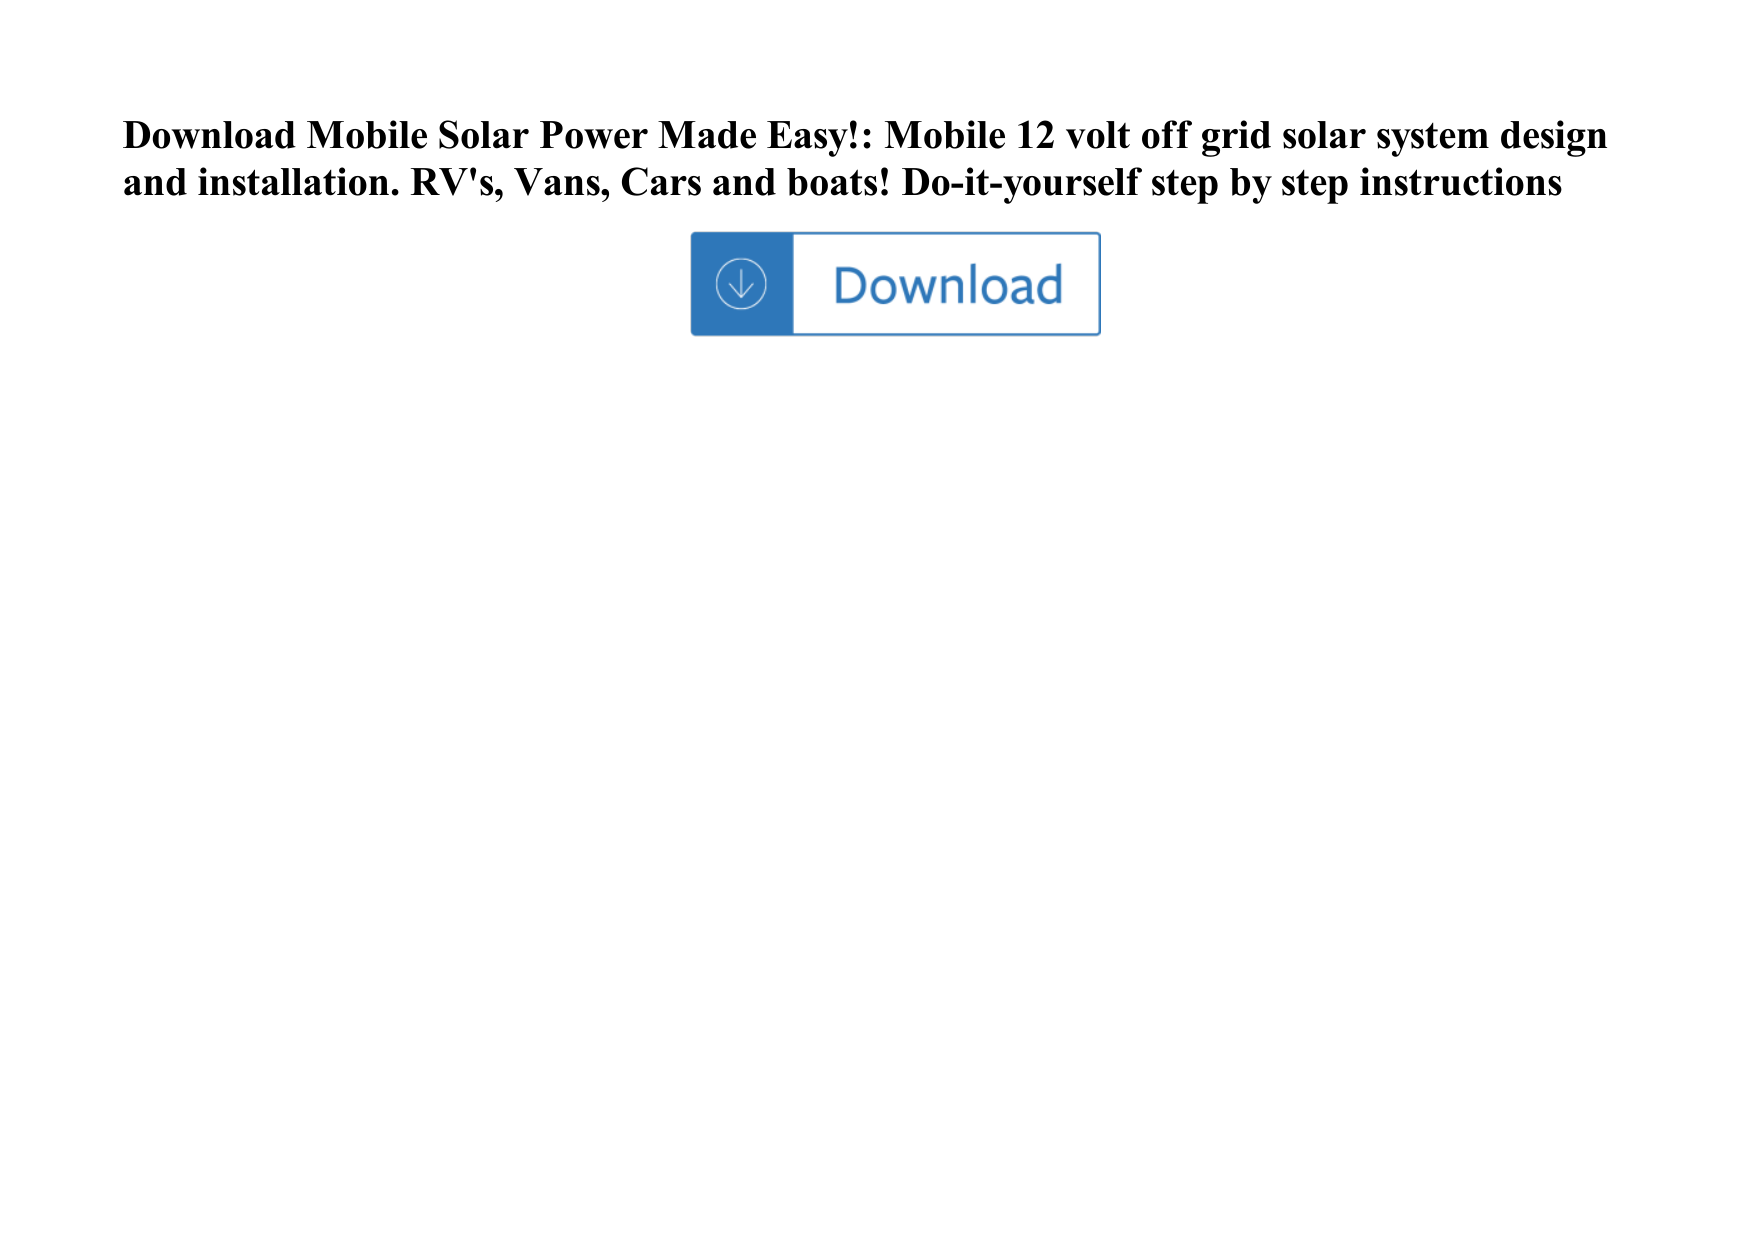 Page 1 of 1 - Mobile Solar Power Made Easy!: 12 Volt Off Grid System Design And Installation. RV's, Vans, Cars Boats! Do- Mobile-solar-power-made-easy-mobile-12-volt-off-grid-solar-system-design-and-installation-rvs-vans-cars-and-boats-do-it-yourself